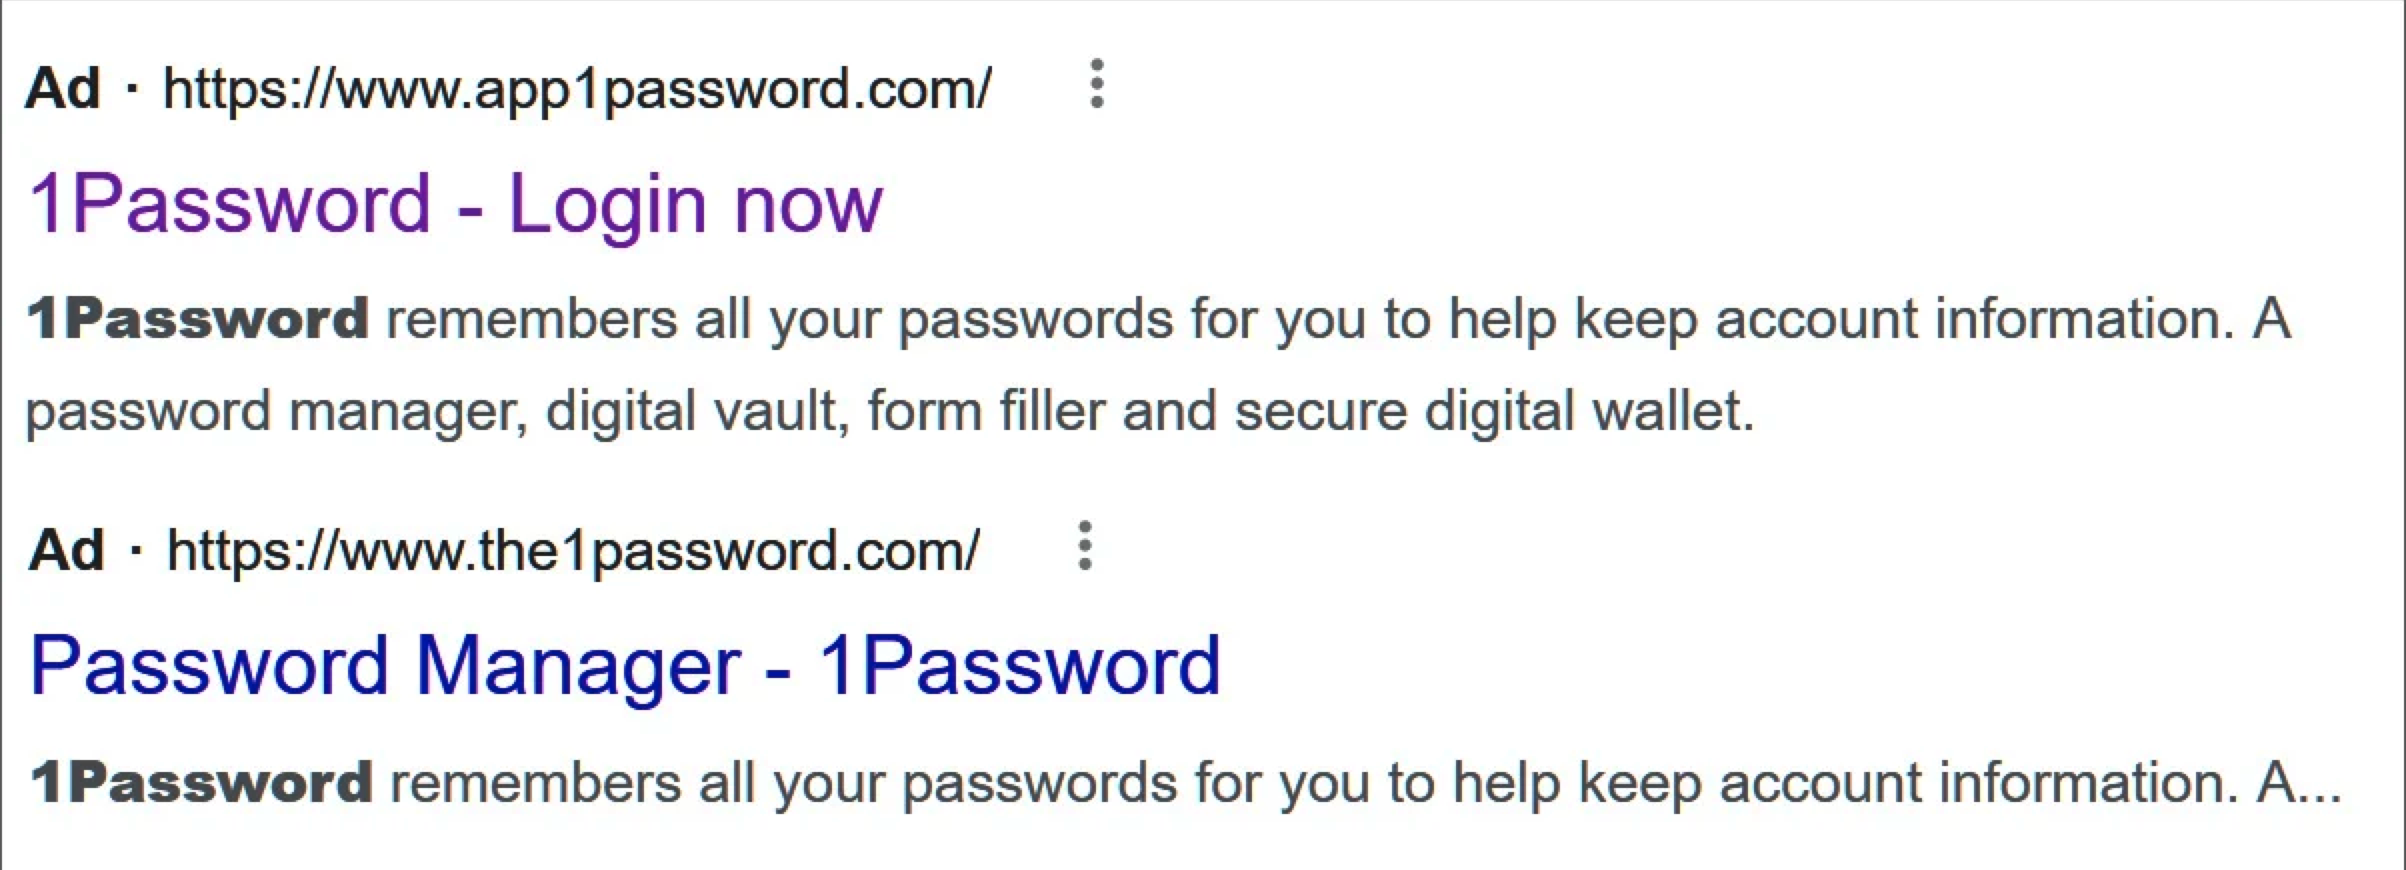 Scammers are getting crafty with their URLs